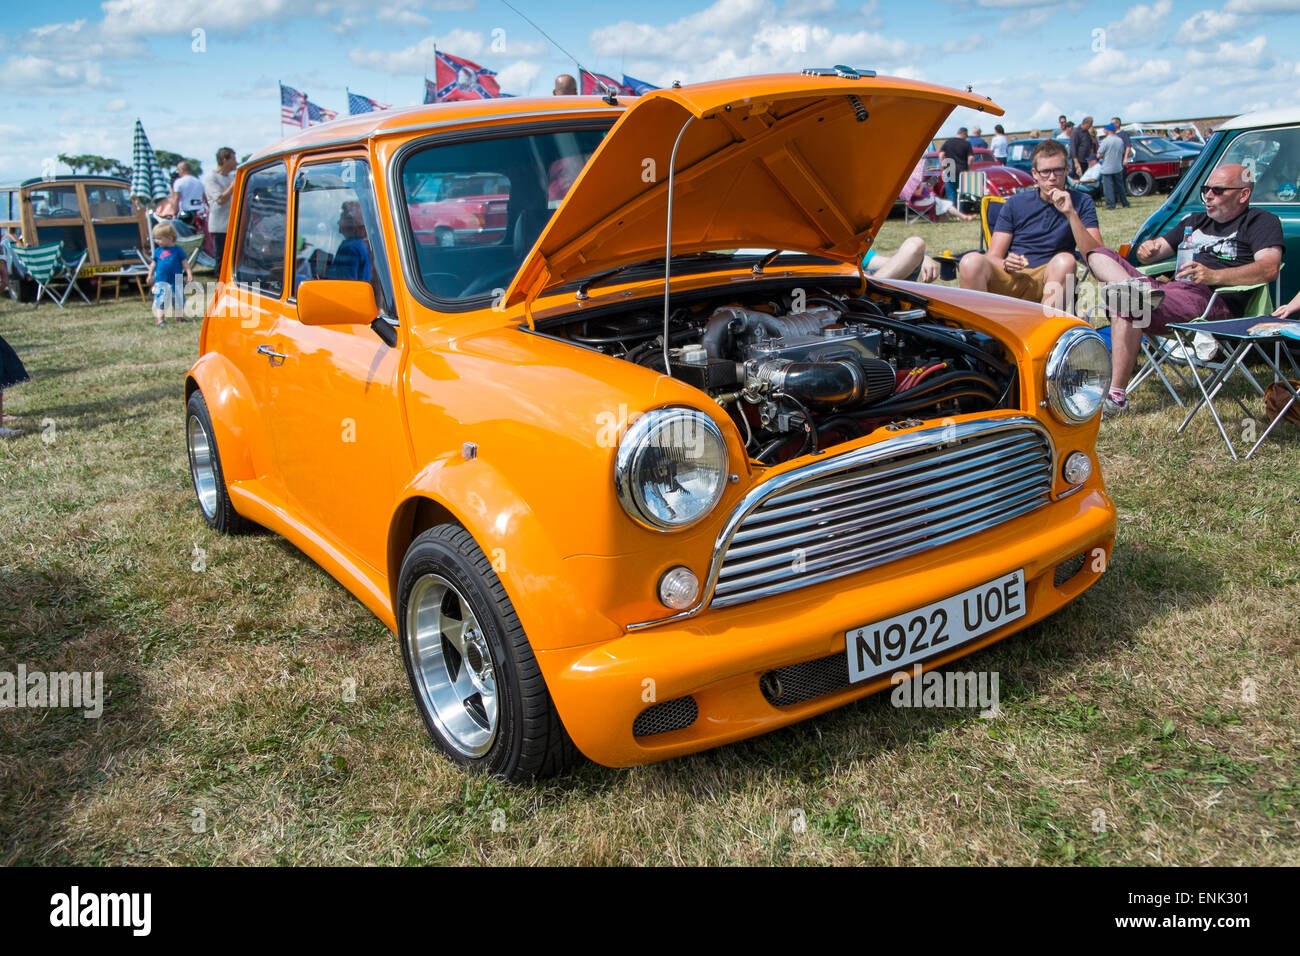 WINDSOR, BERKSHIRE, UK- AUGUST 3, 2014: An Orange Classic Mini with the bonnet open on show at a Classic Car Show in August 2013 Stock Photo